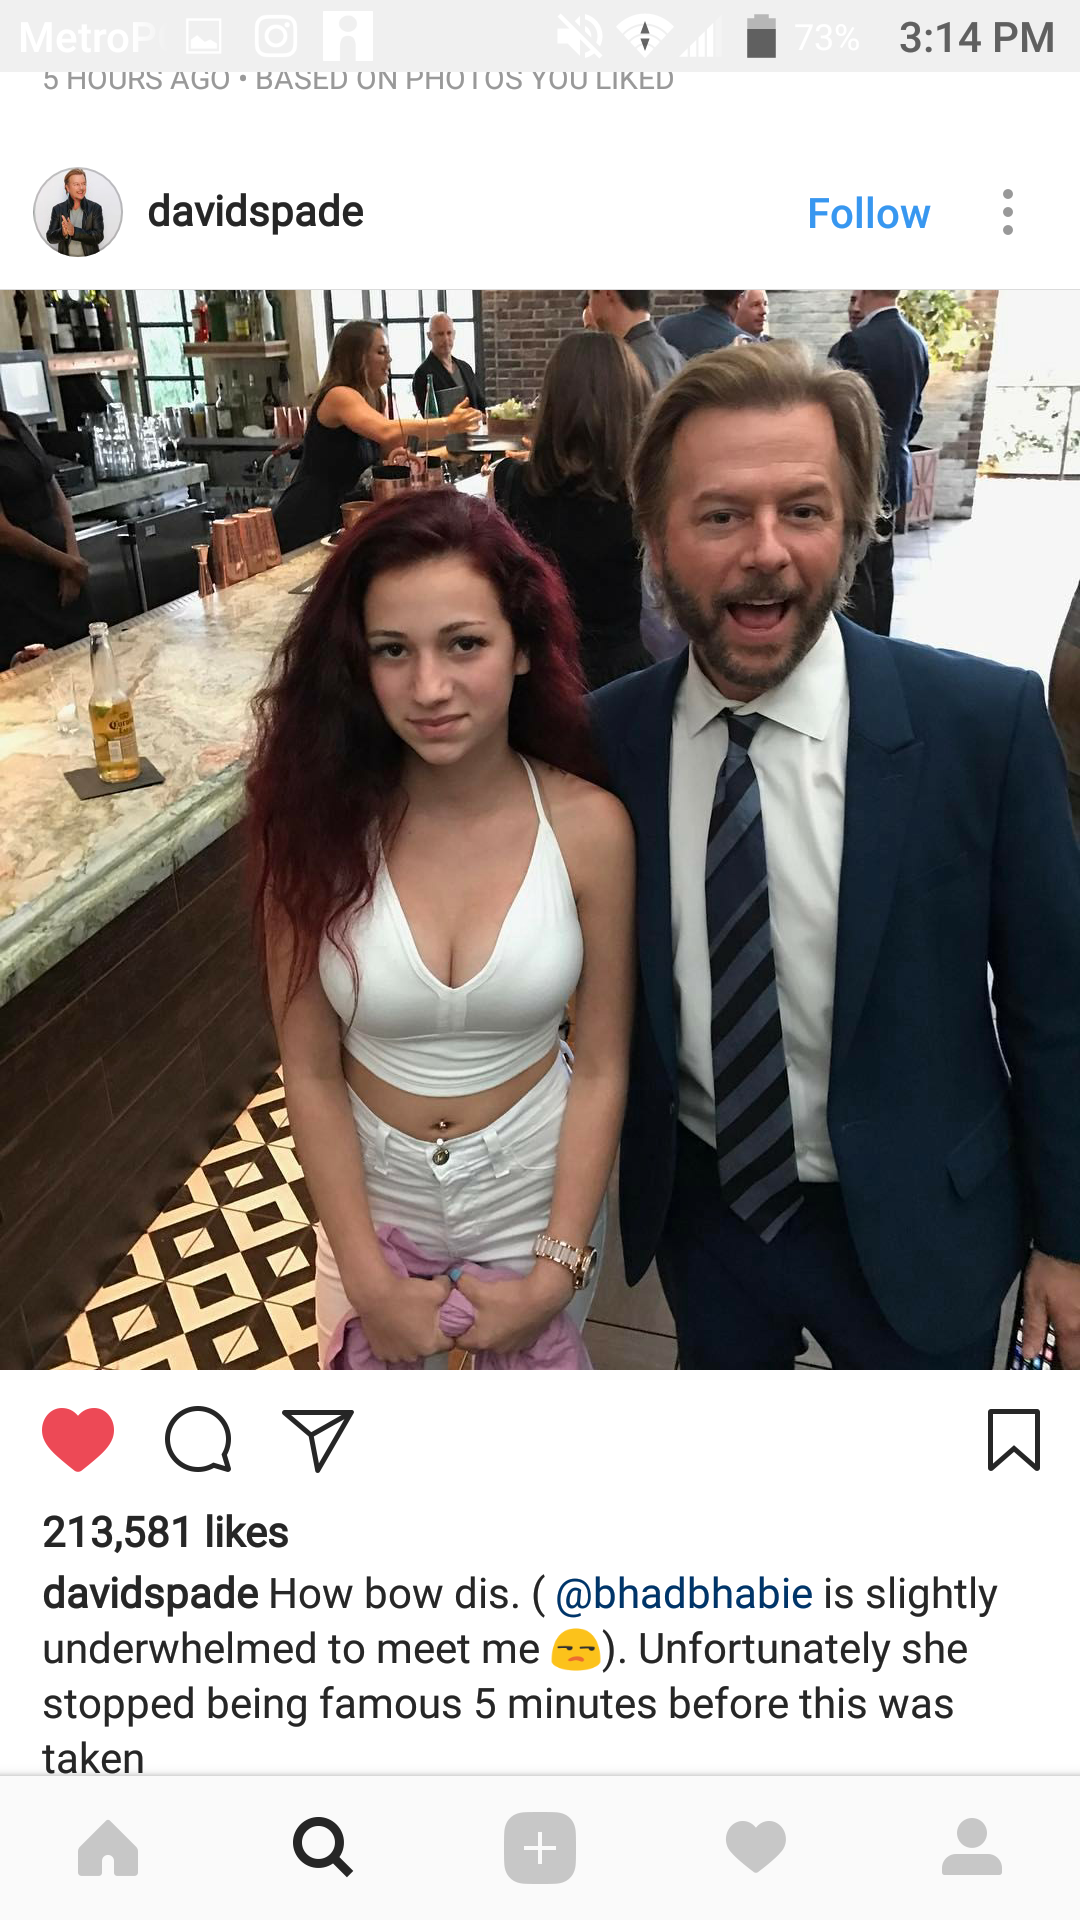 funny picture of David Spade meeting Bhad Bahbie without her knowing who he is